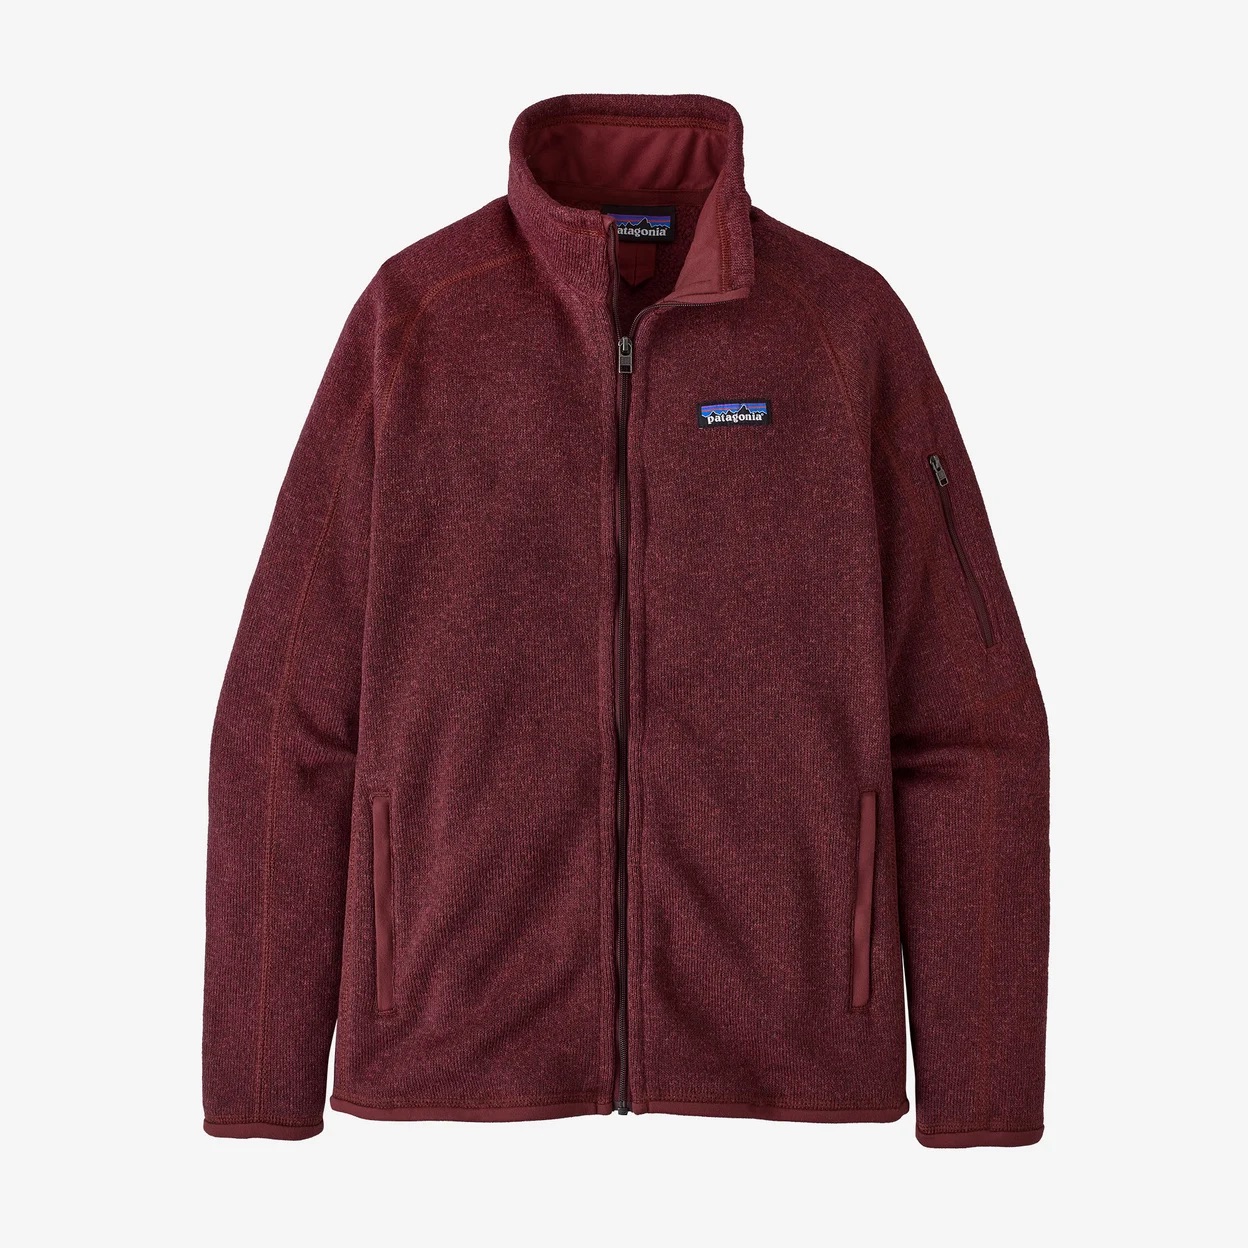 Patagonia W's Better Sweater Jacket - Sequoia Red - Medium